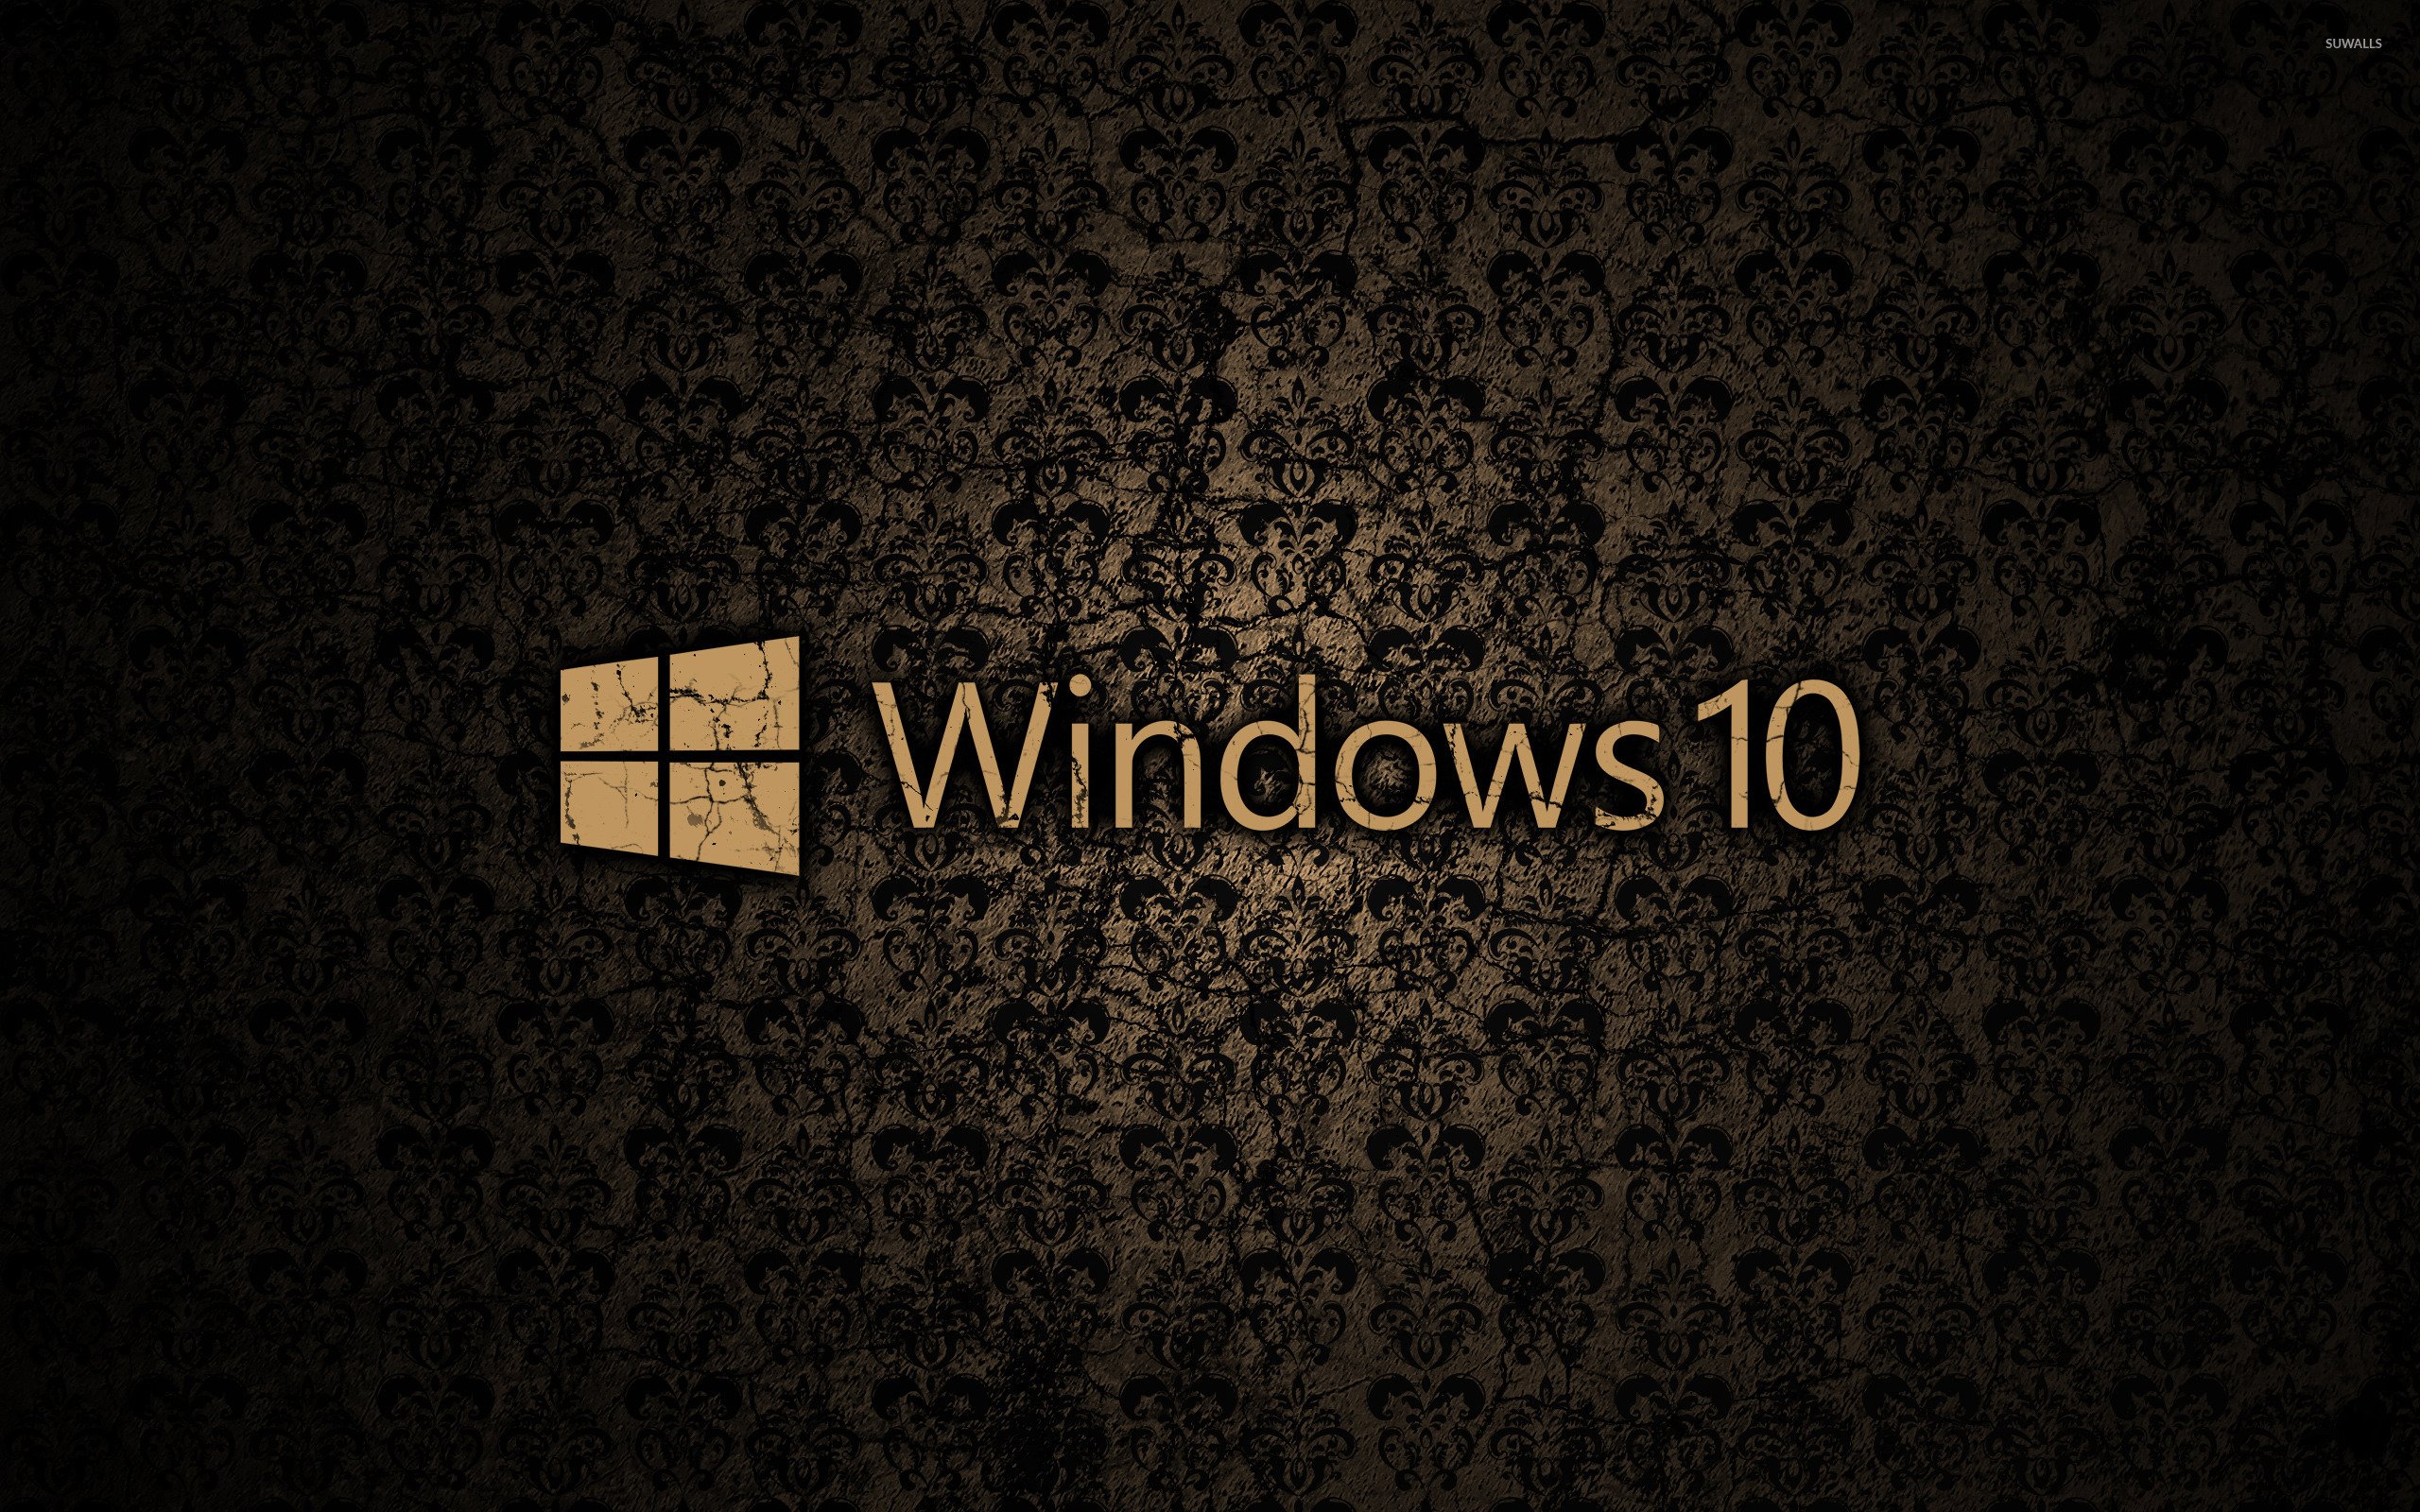 Windows 10 text logo on a cracked wall wallpaper